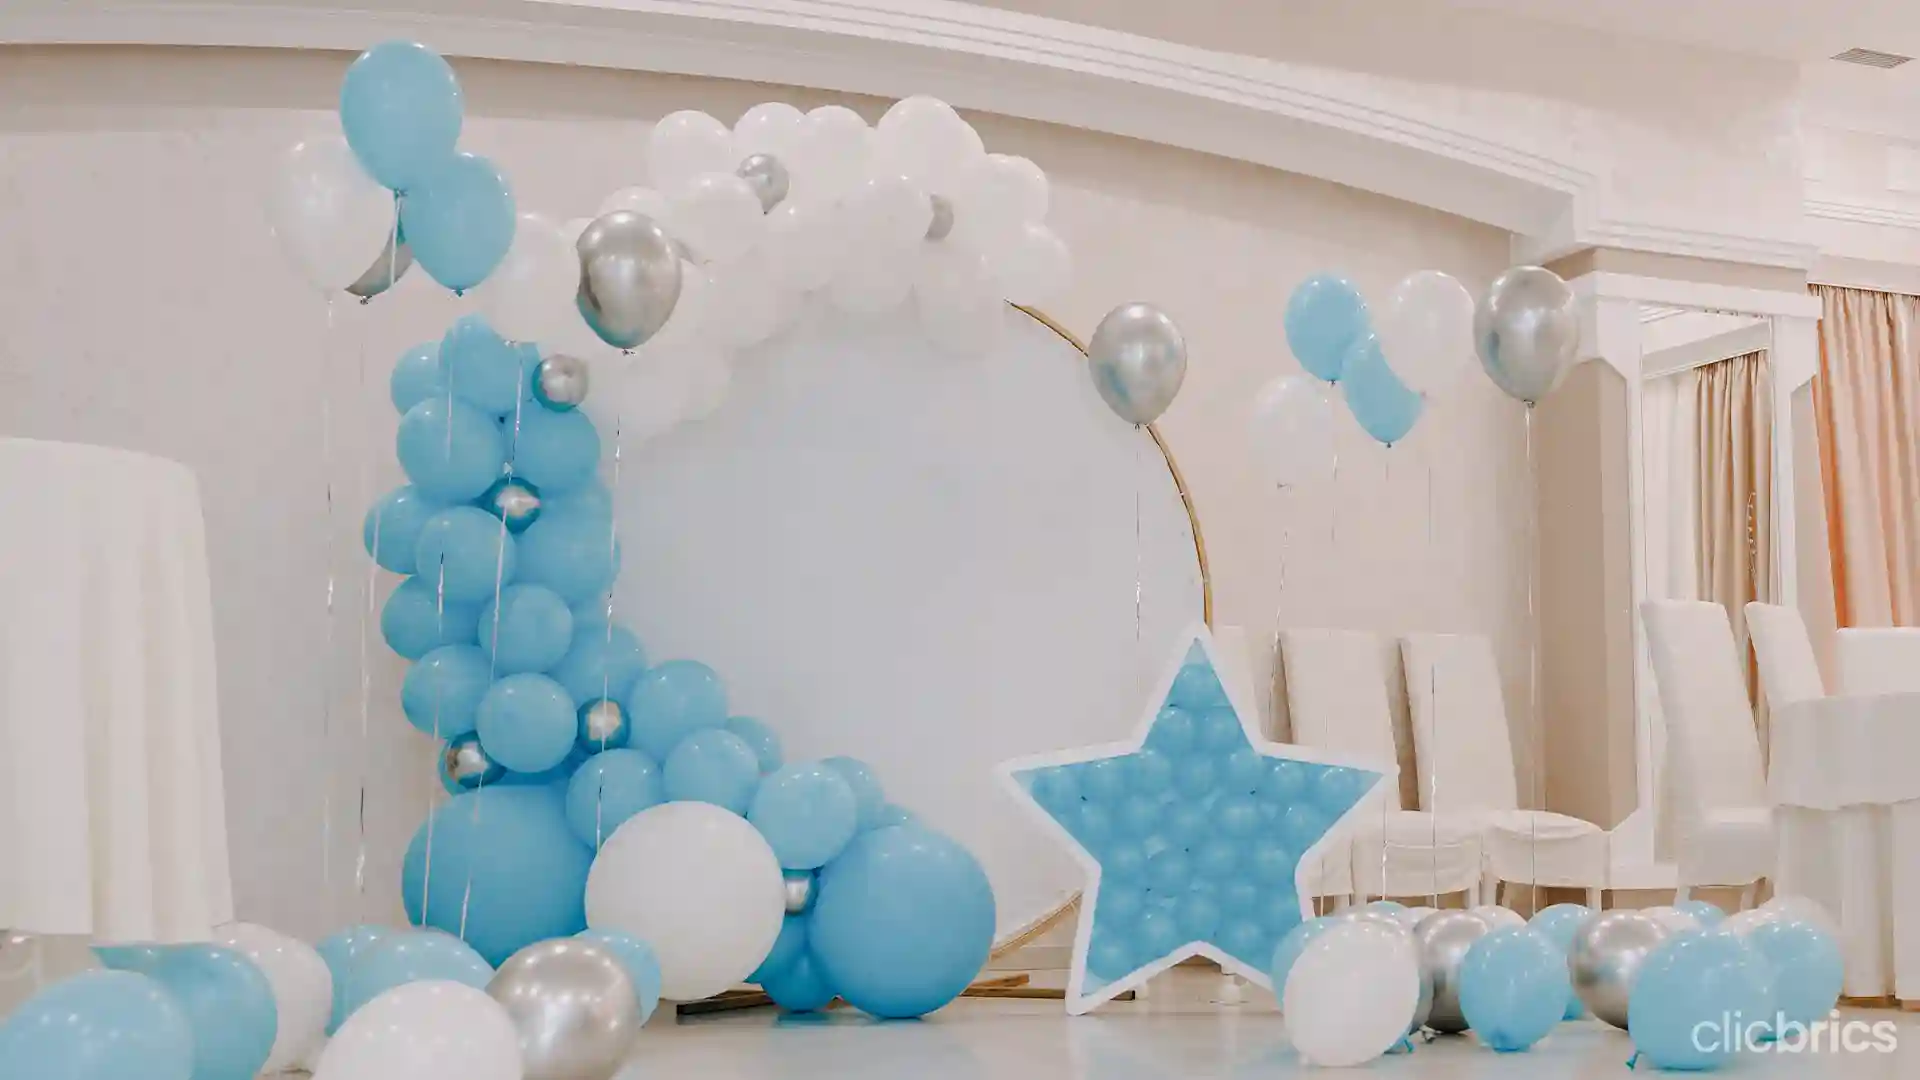 How to Make a DIY Balloon Garland in 3 Easy Steps